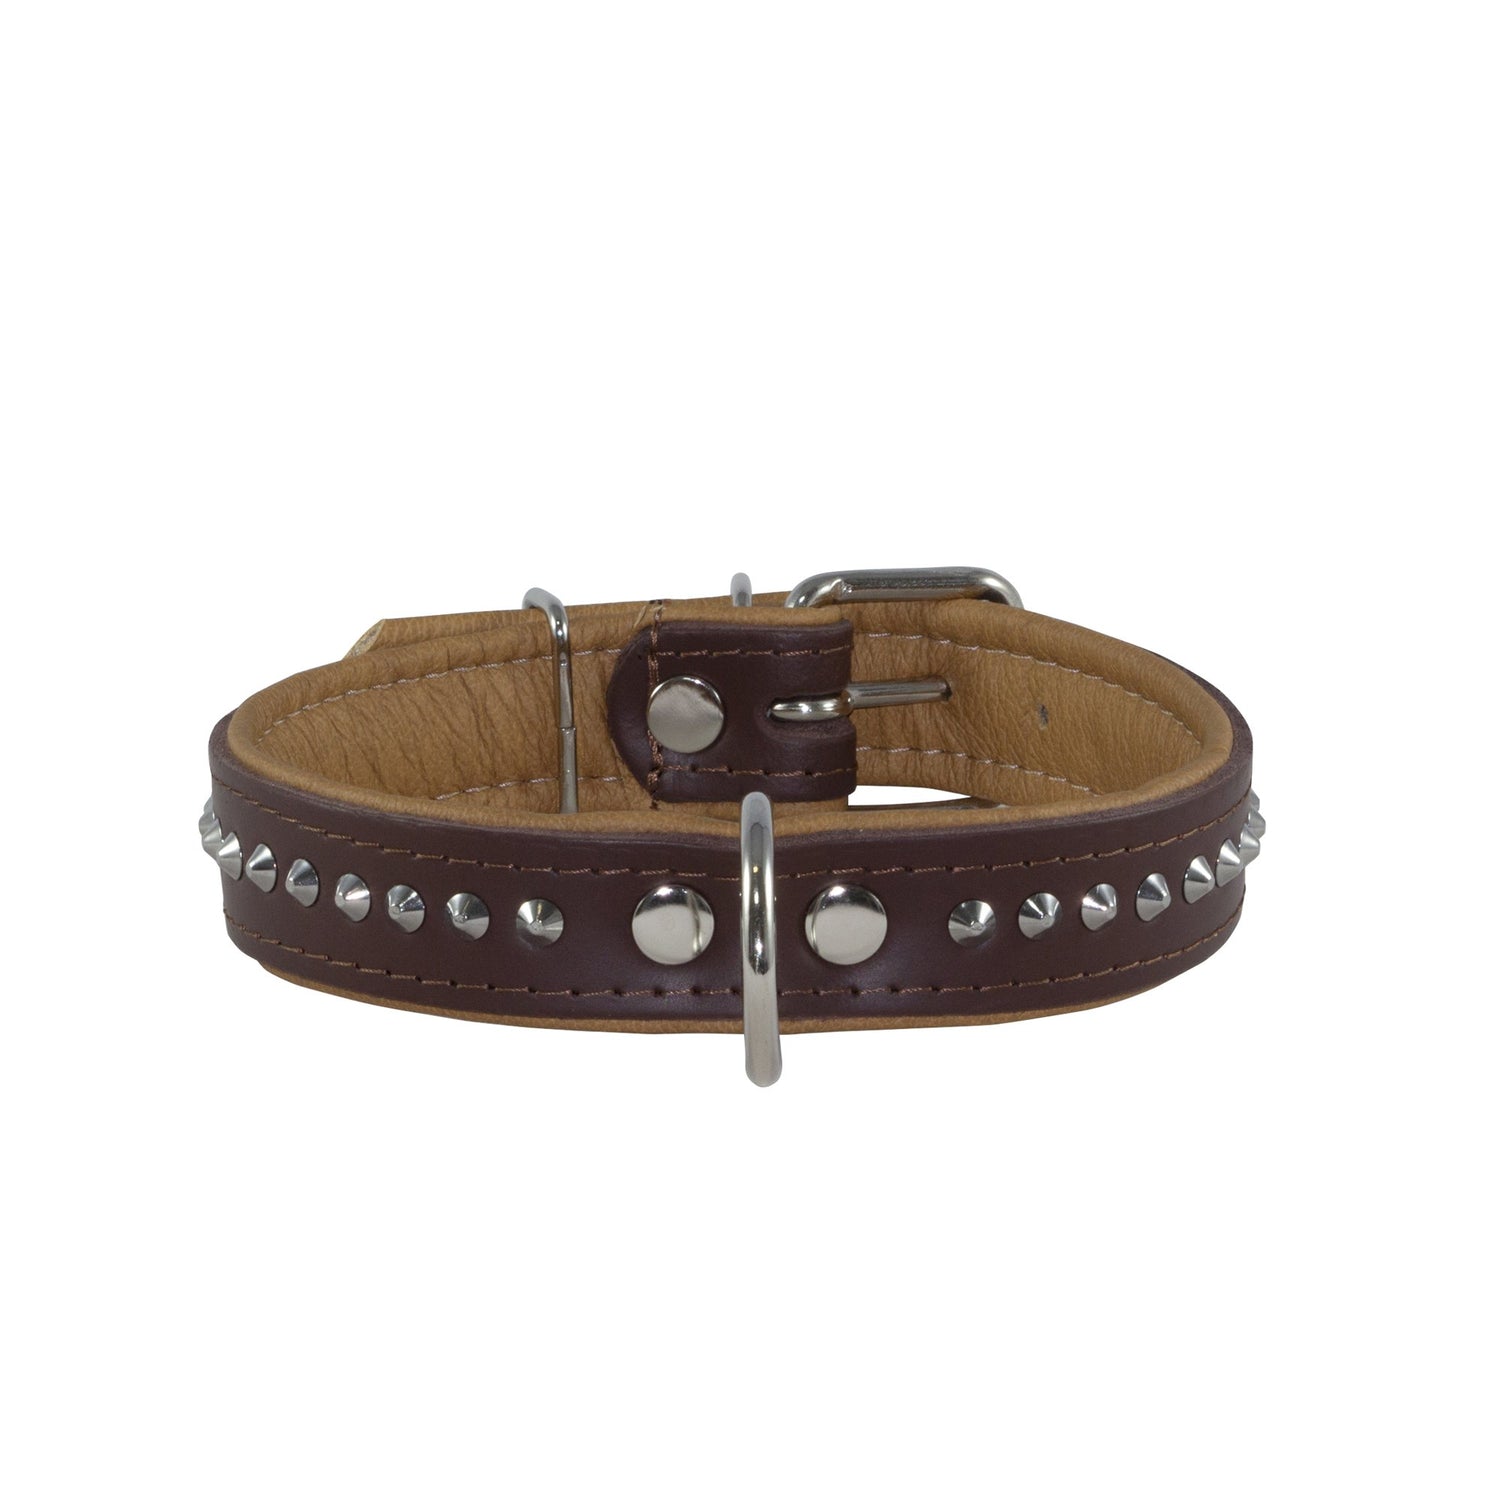 leather collar and lead set, large dog collar